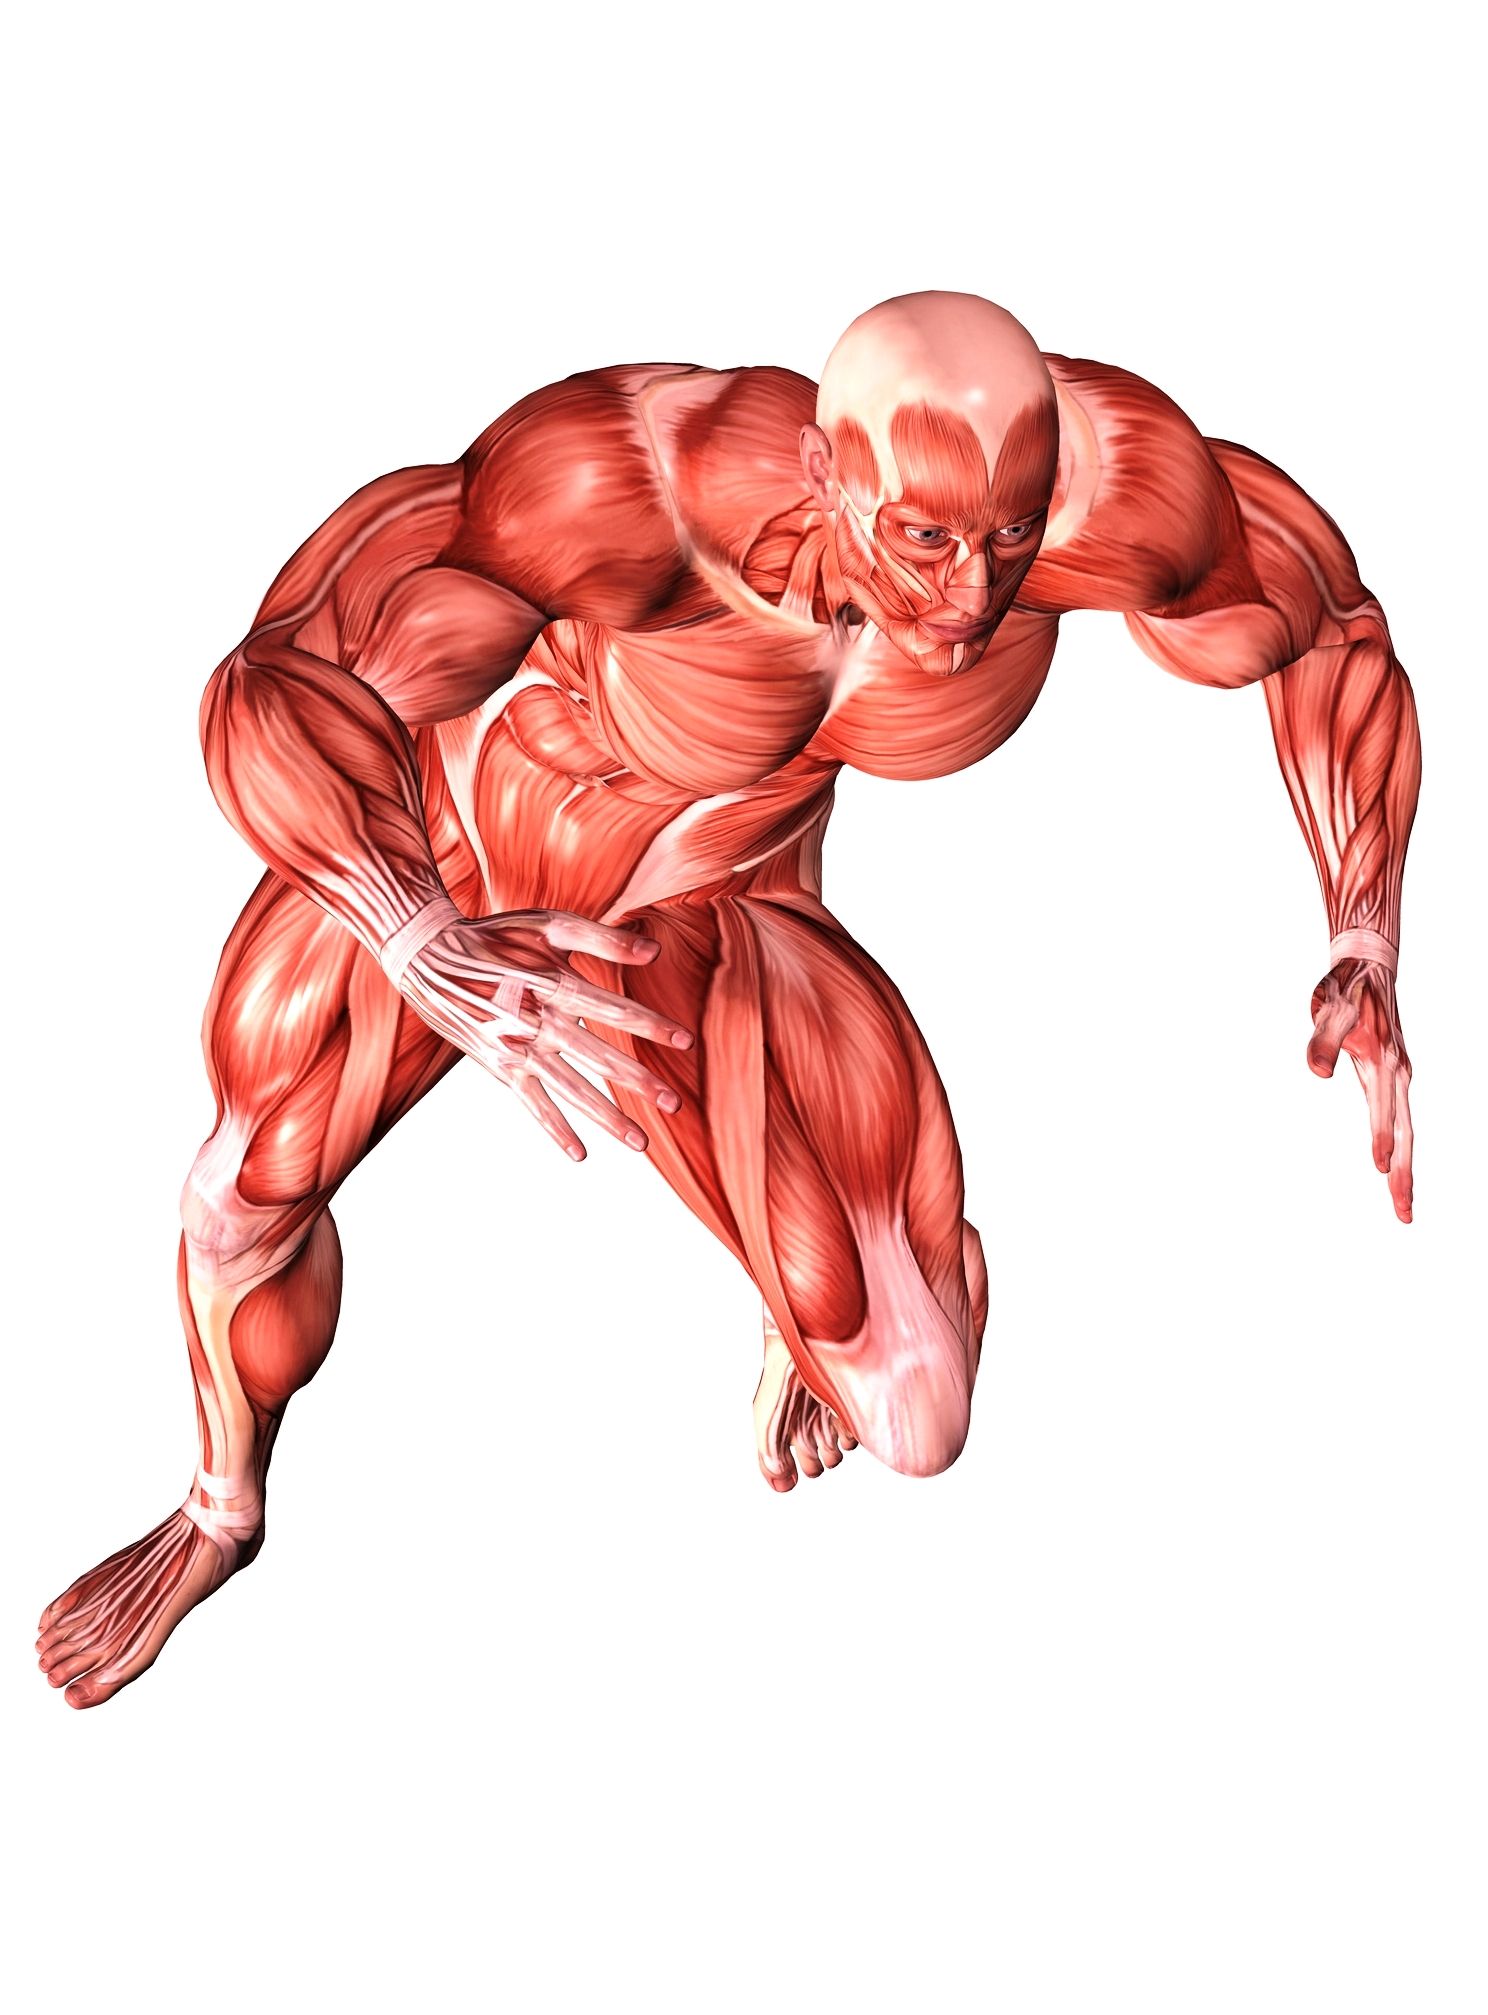 Muscular System Wallpapers Wallpaper Cave